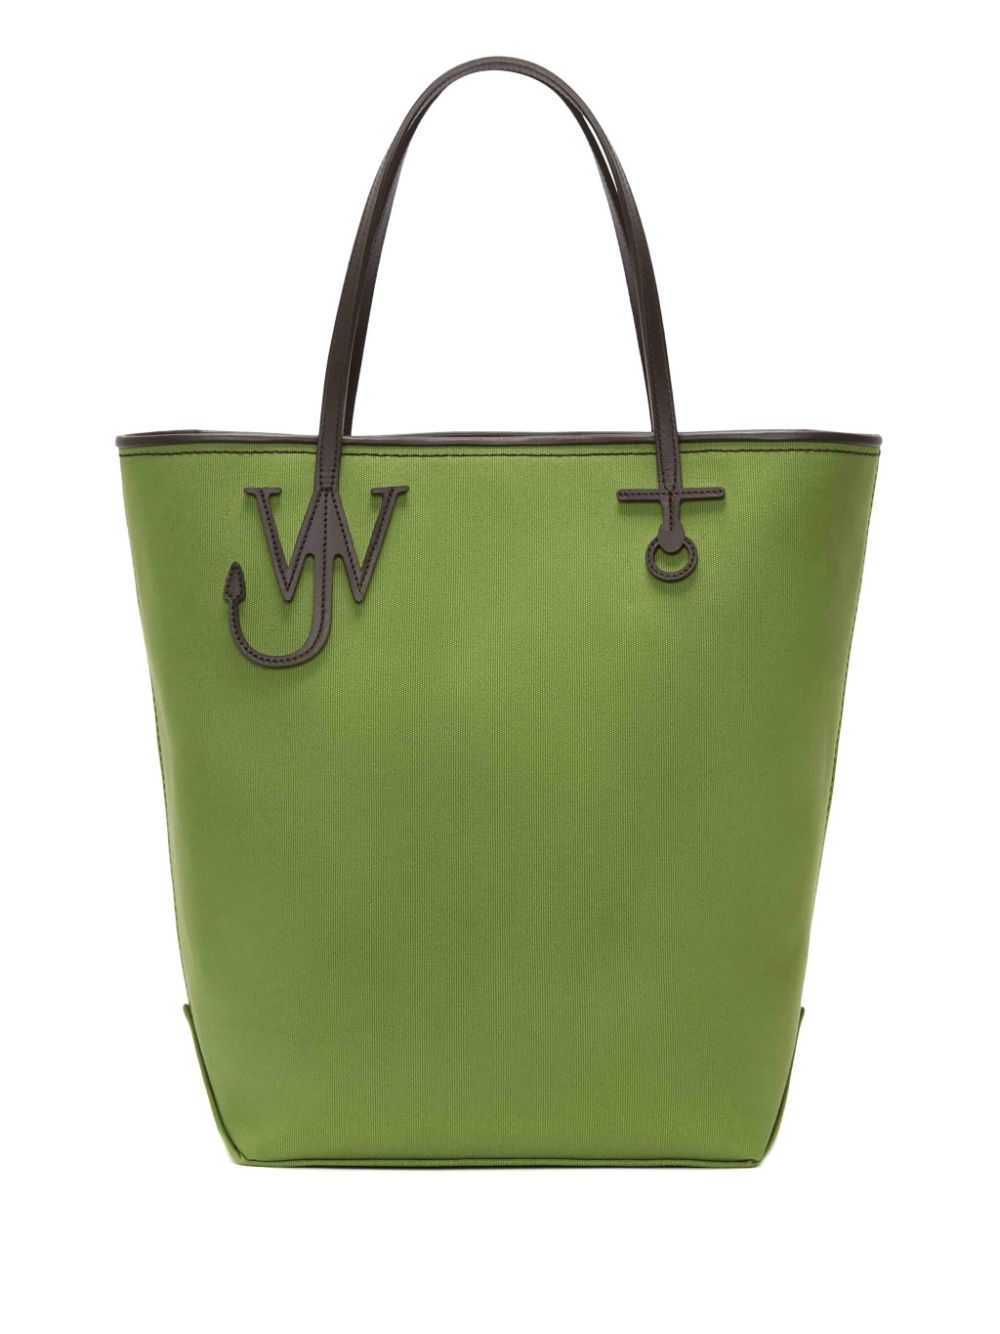 JW Anderson Tall Anchor canvas tote bag - Green von JW Anderson